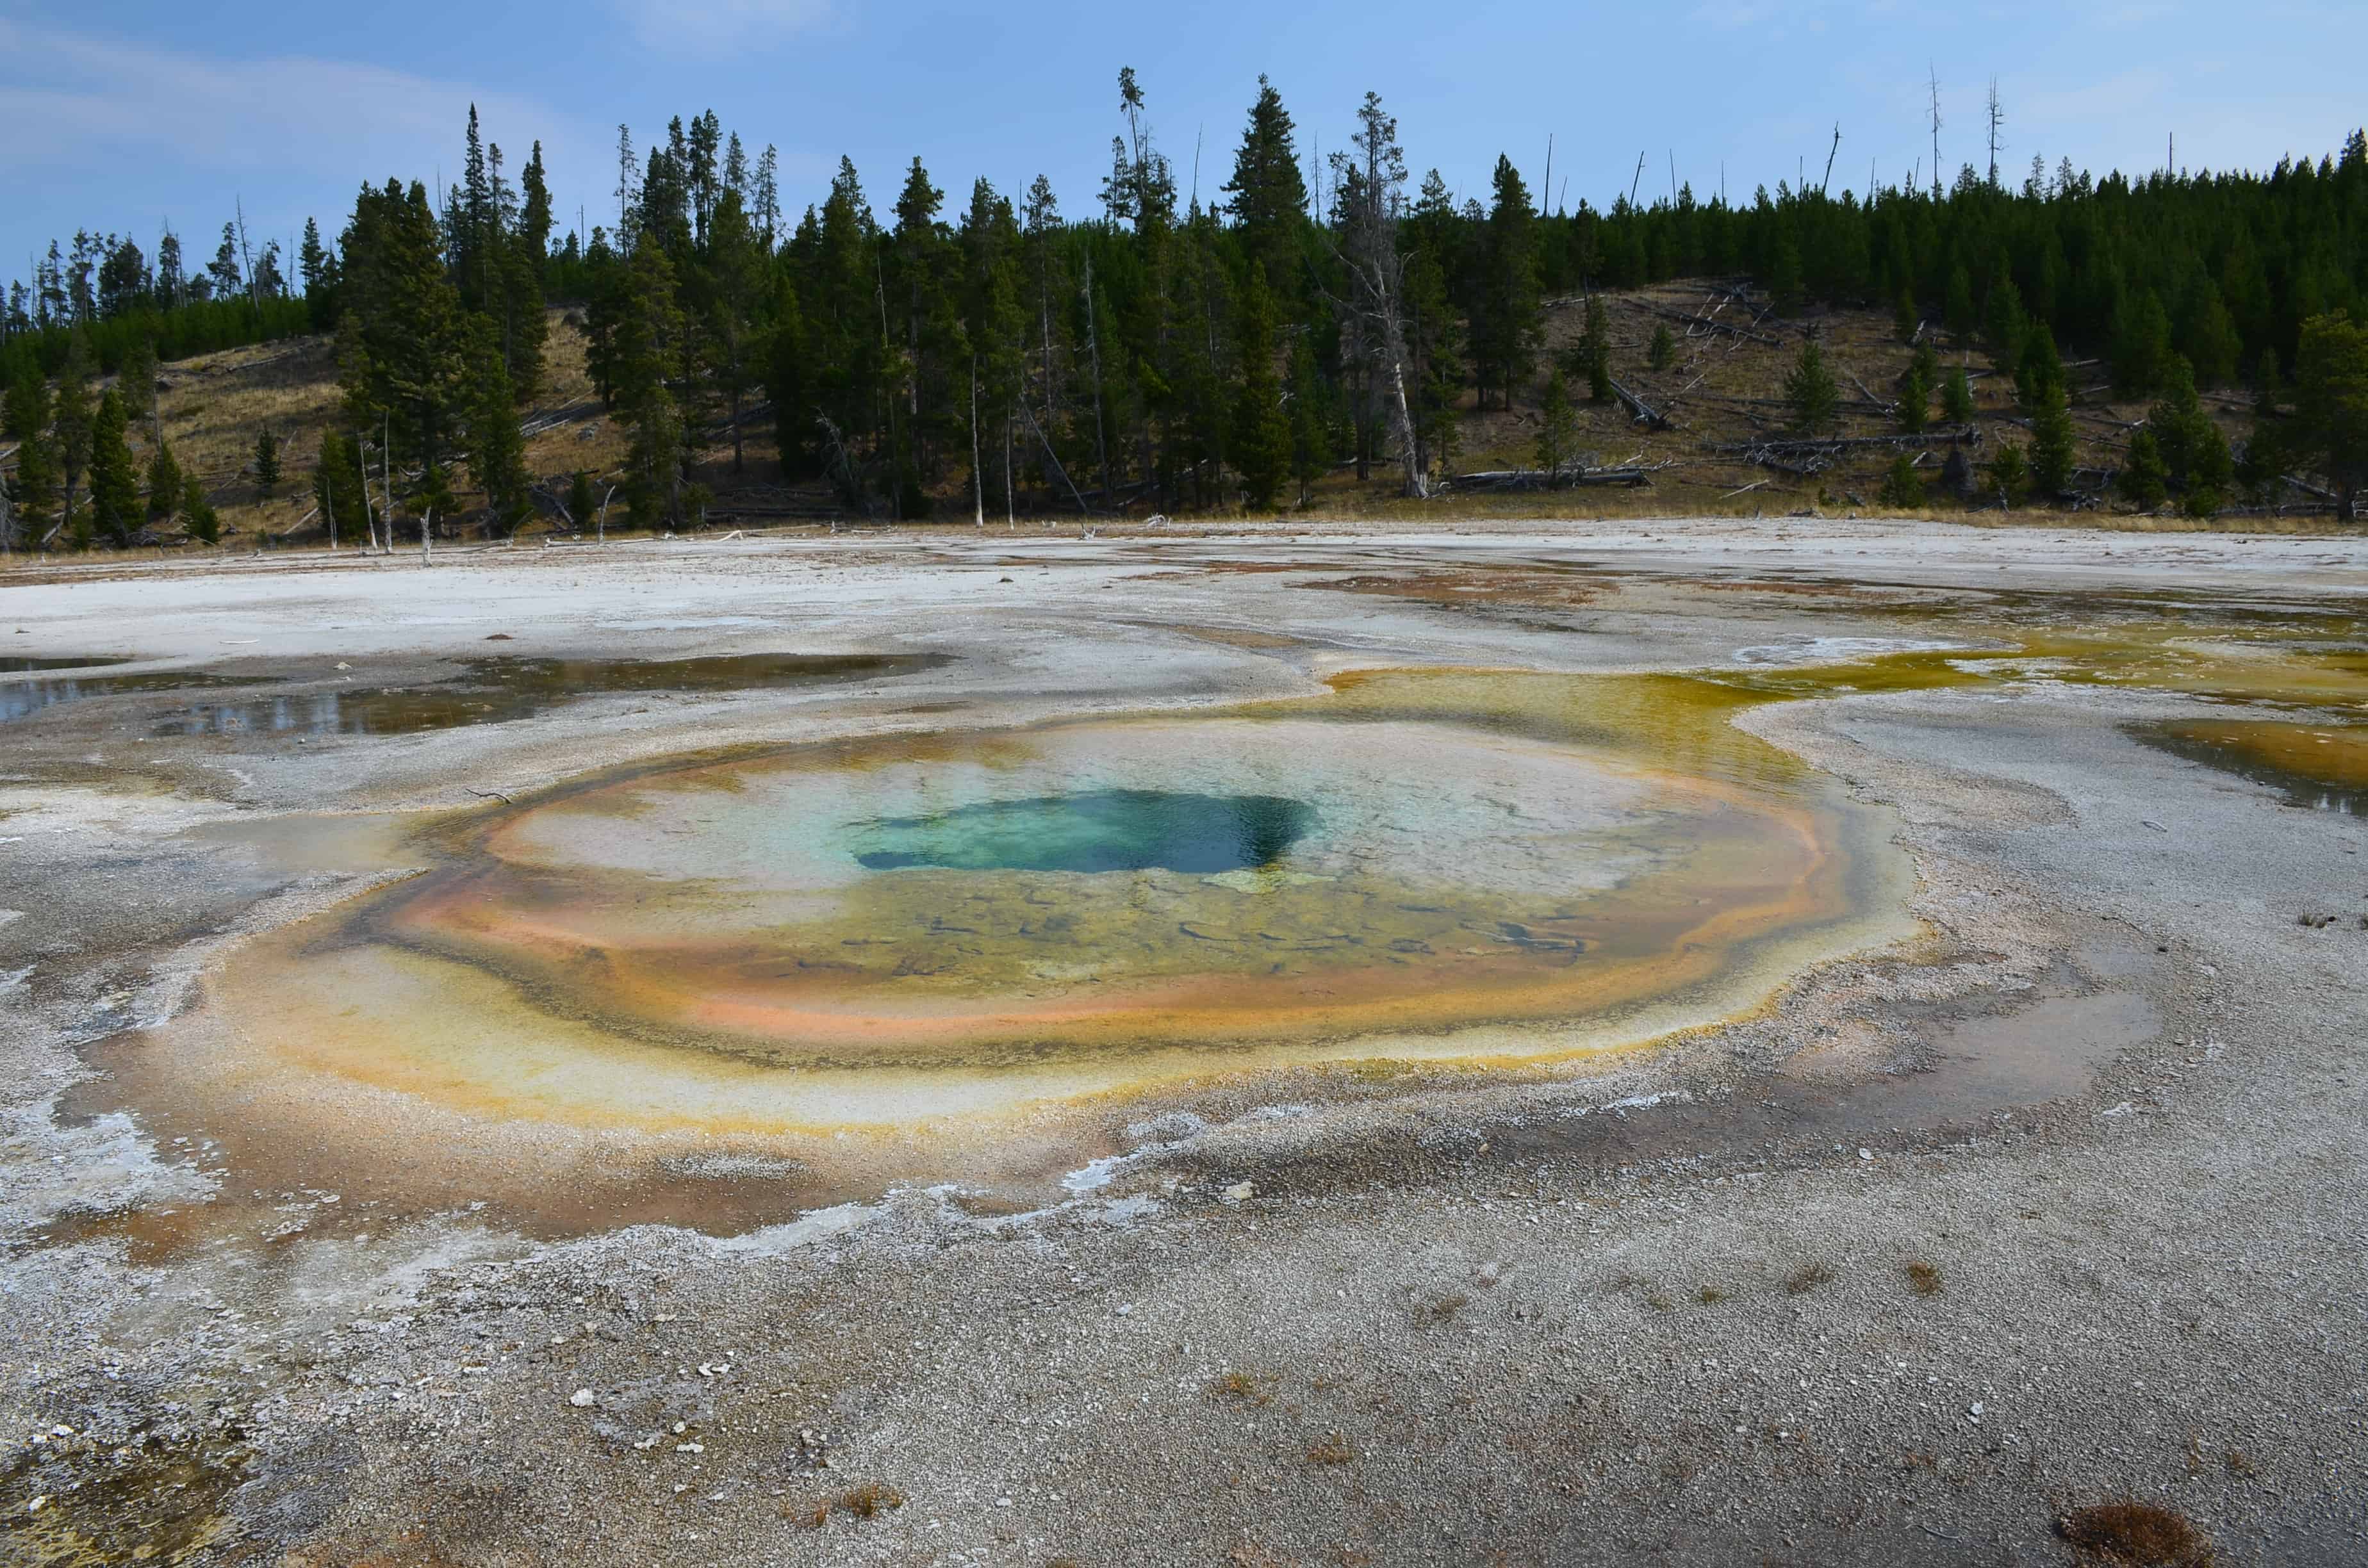 Chromatic Pool at the Upper Geyser Basin in Yellowstone National Park, Wyoming